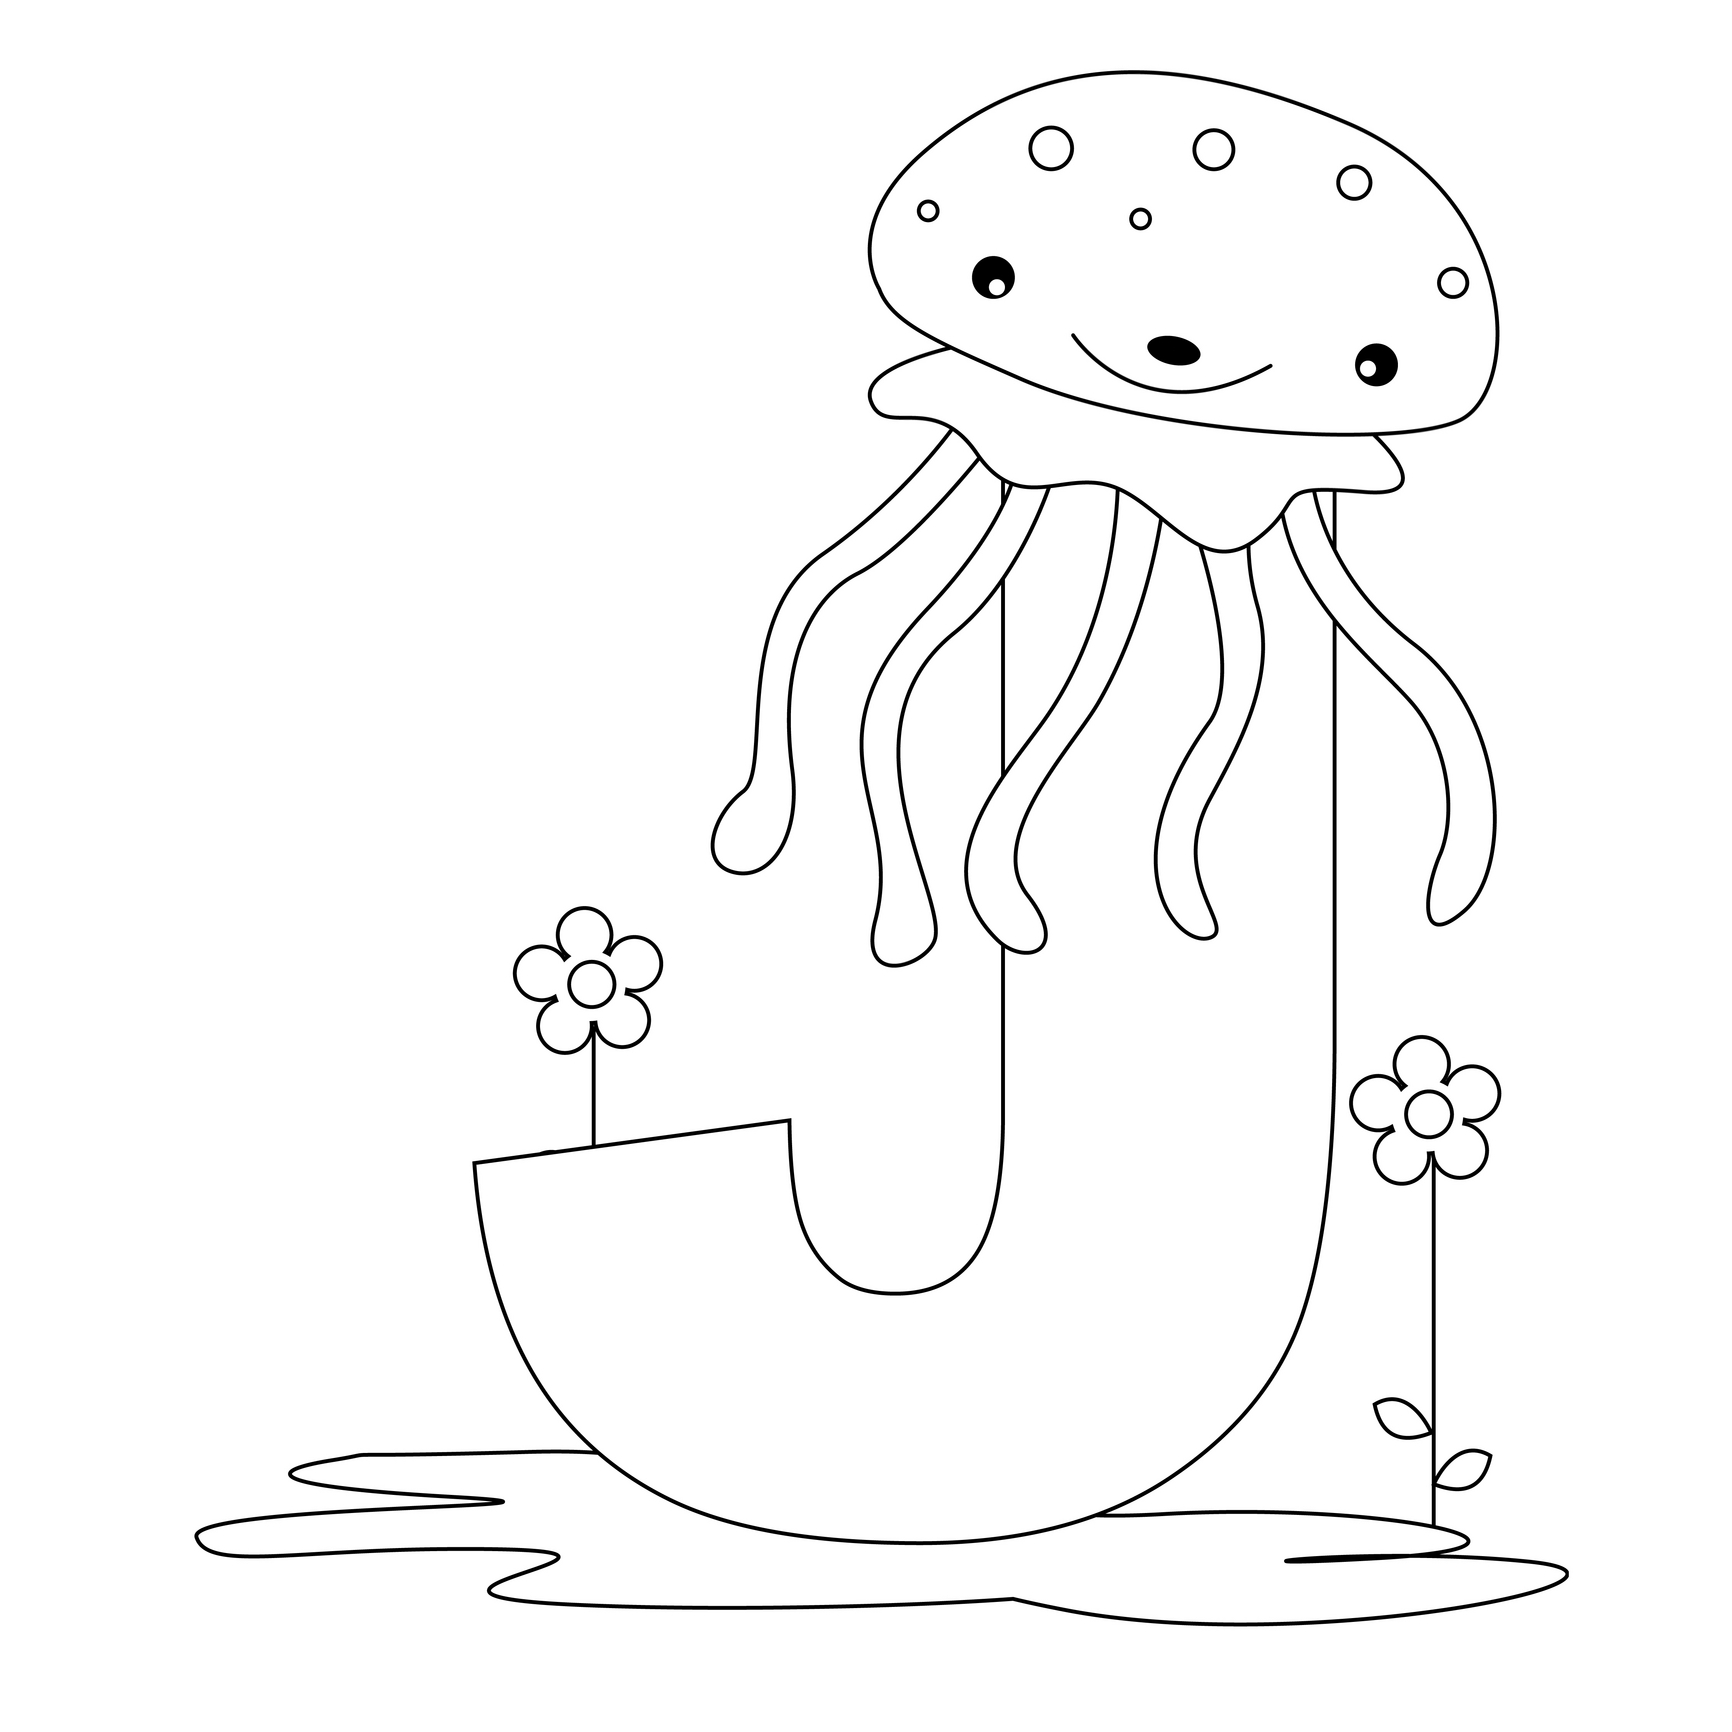 Letter J Coloring Pages For Preschool at GetDrawings | Free download